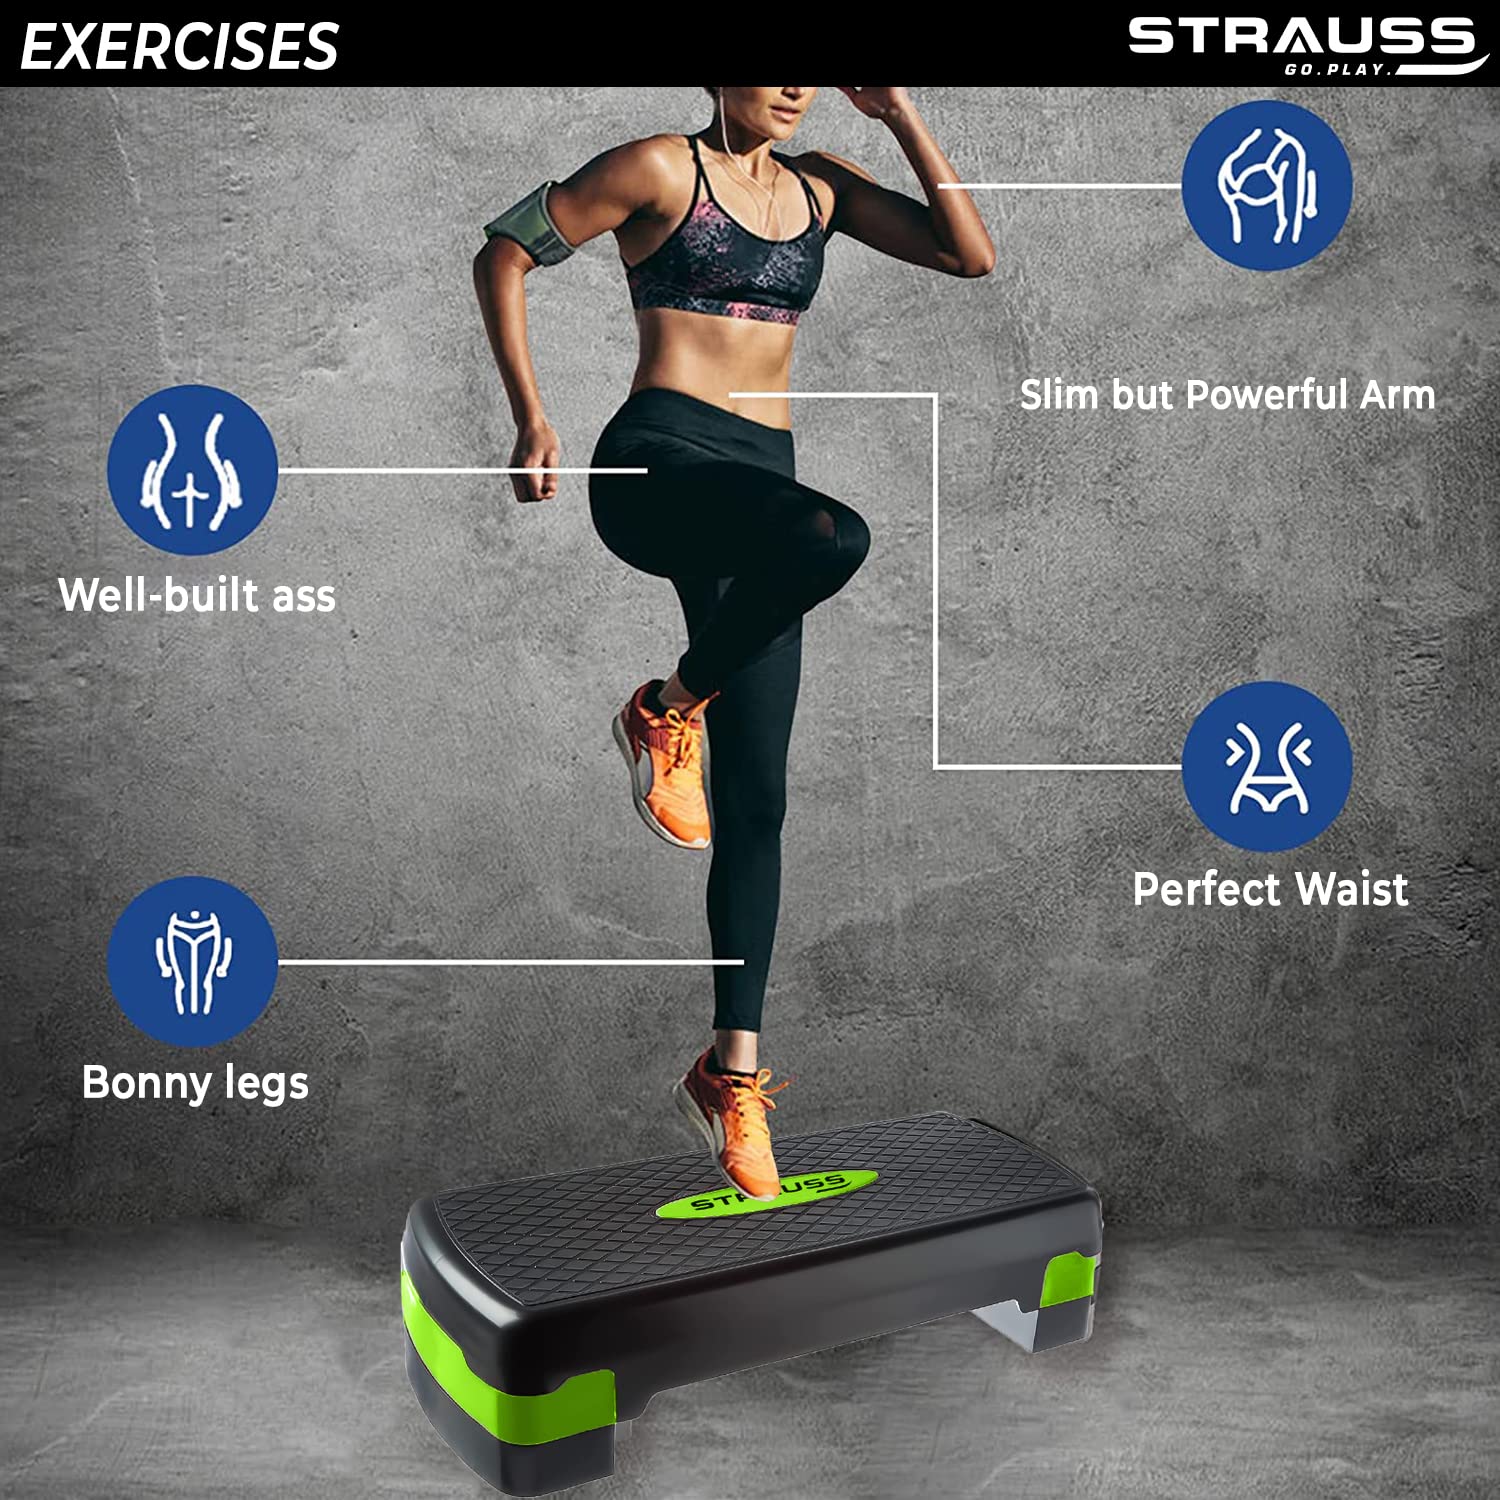 Strauss Aerobic Stepper | Two Height Level Adjustments - 4 inches and 6 inches | Slip-Resistant & Shock Absorbing Platform for Extra-Durability - Supports Upto 200 KG, (Green)